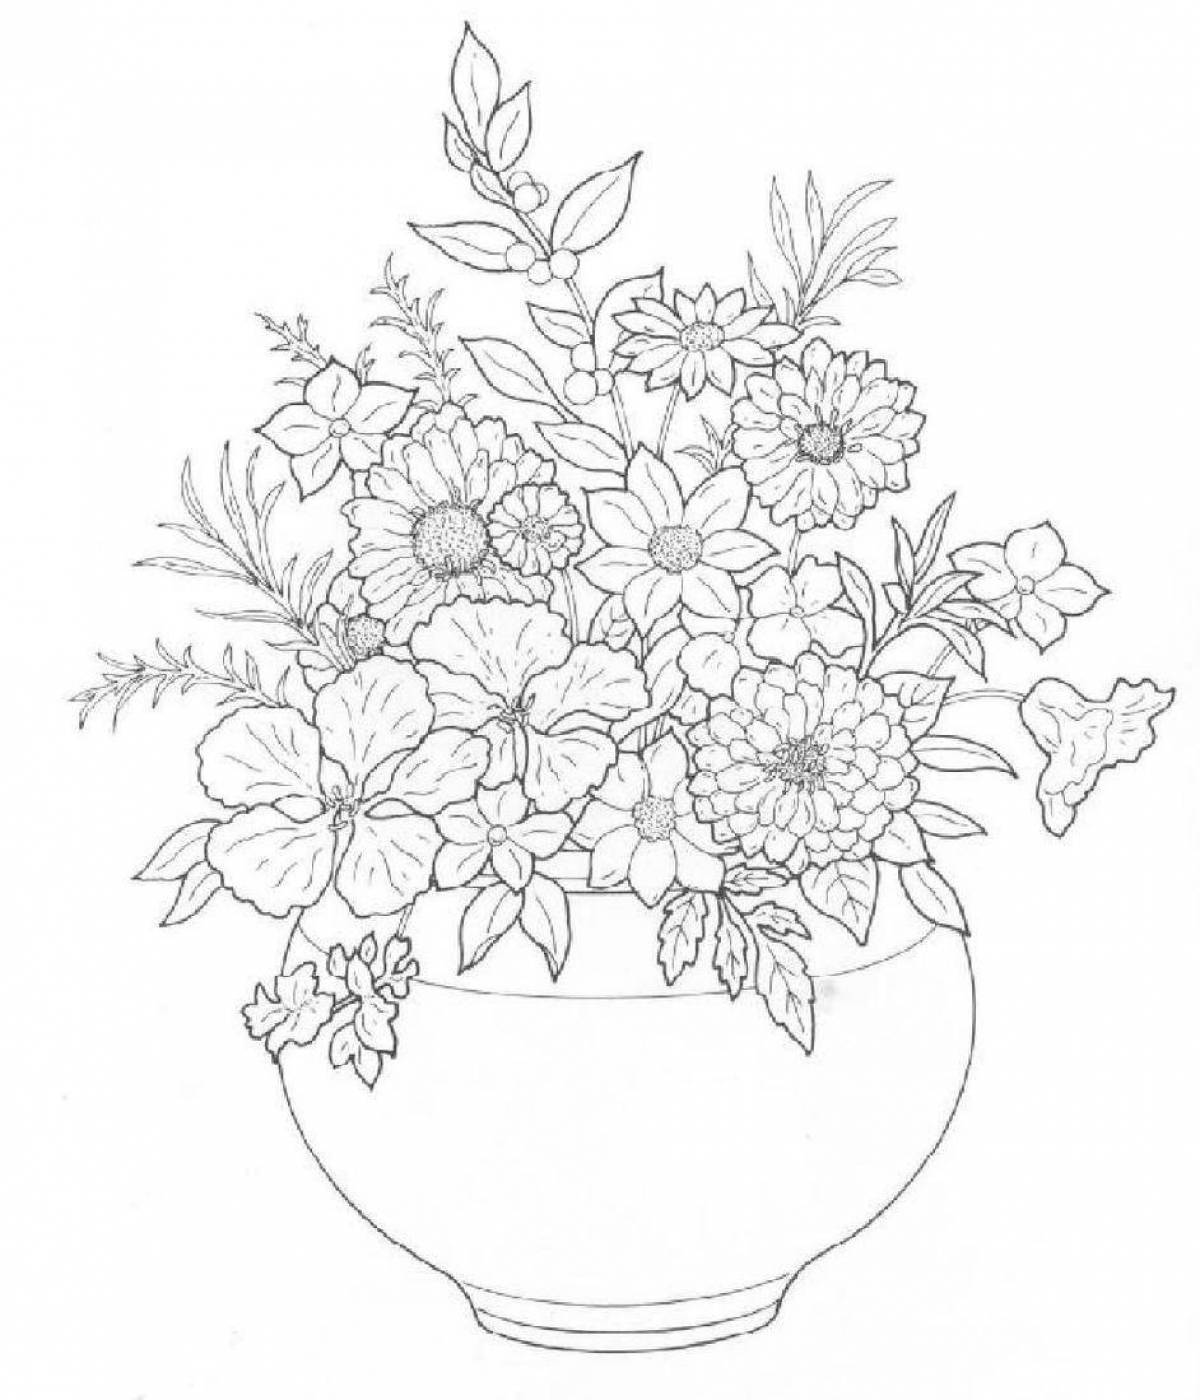 Coloring bright bouquet in a vase